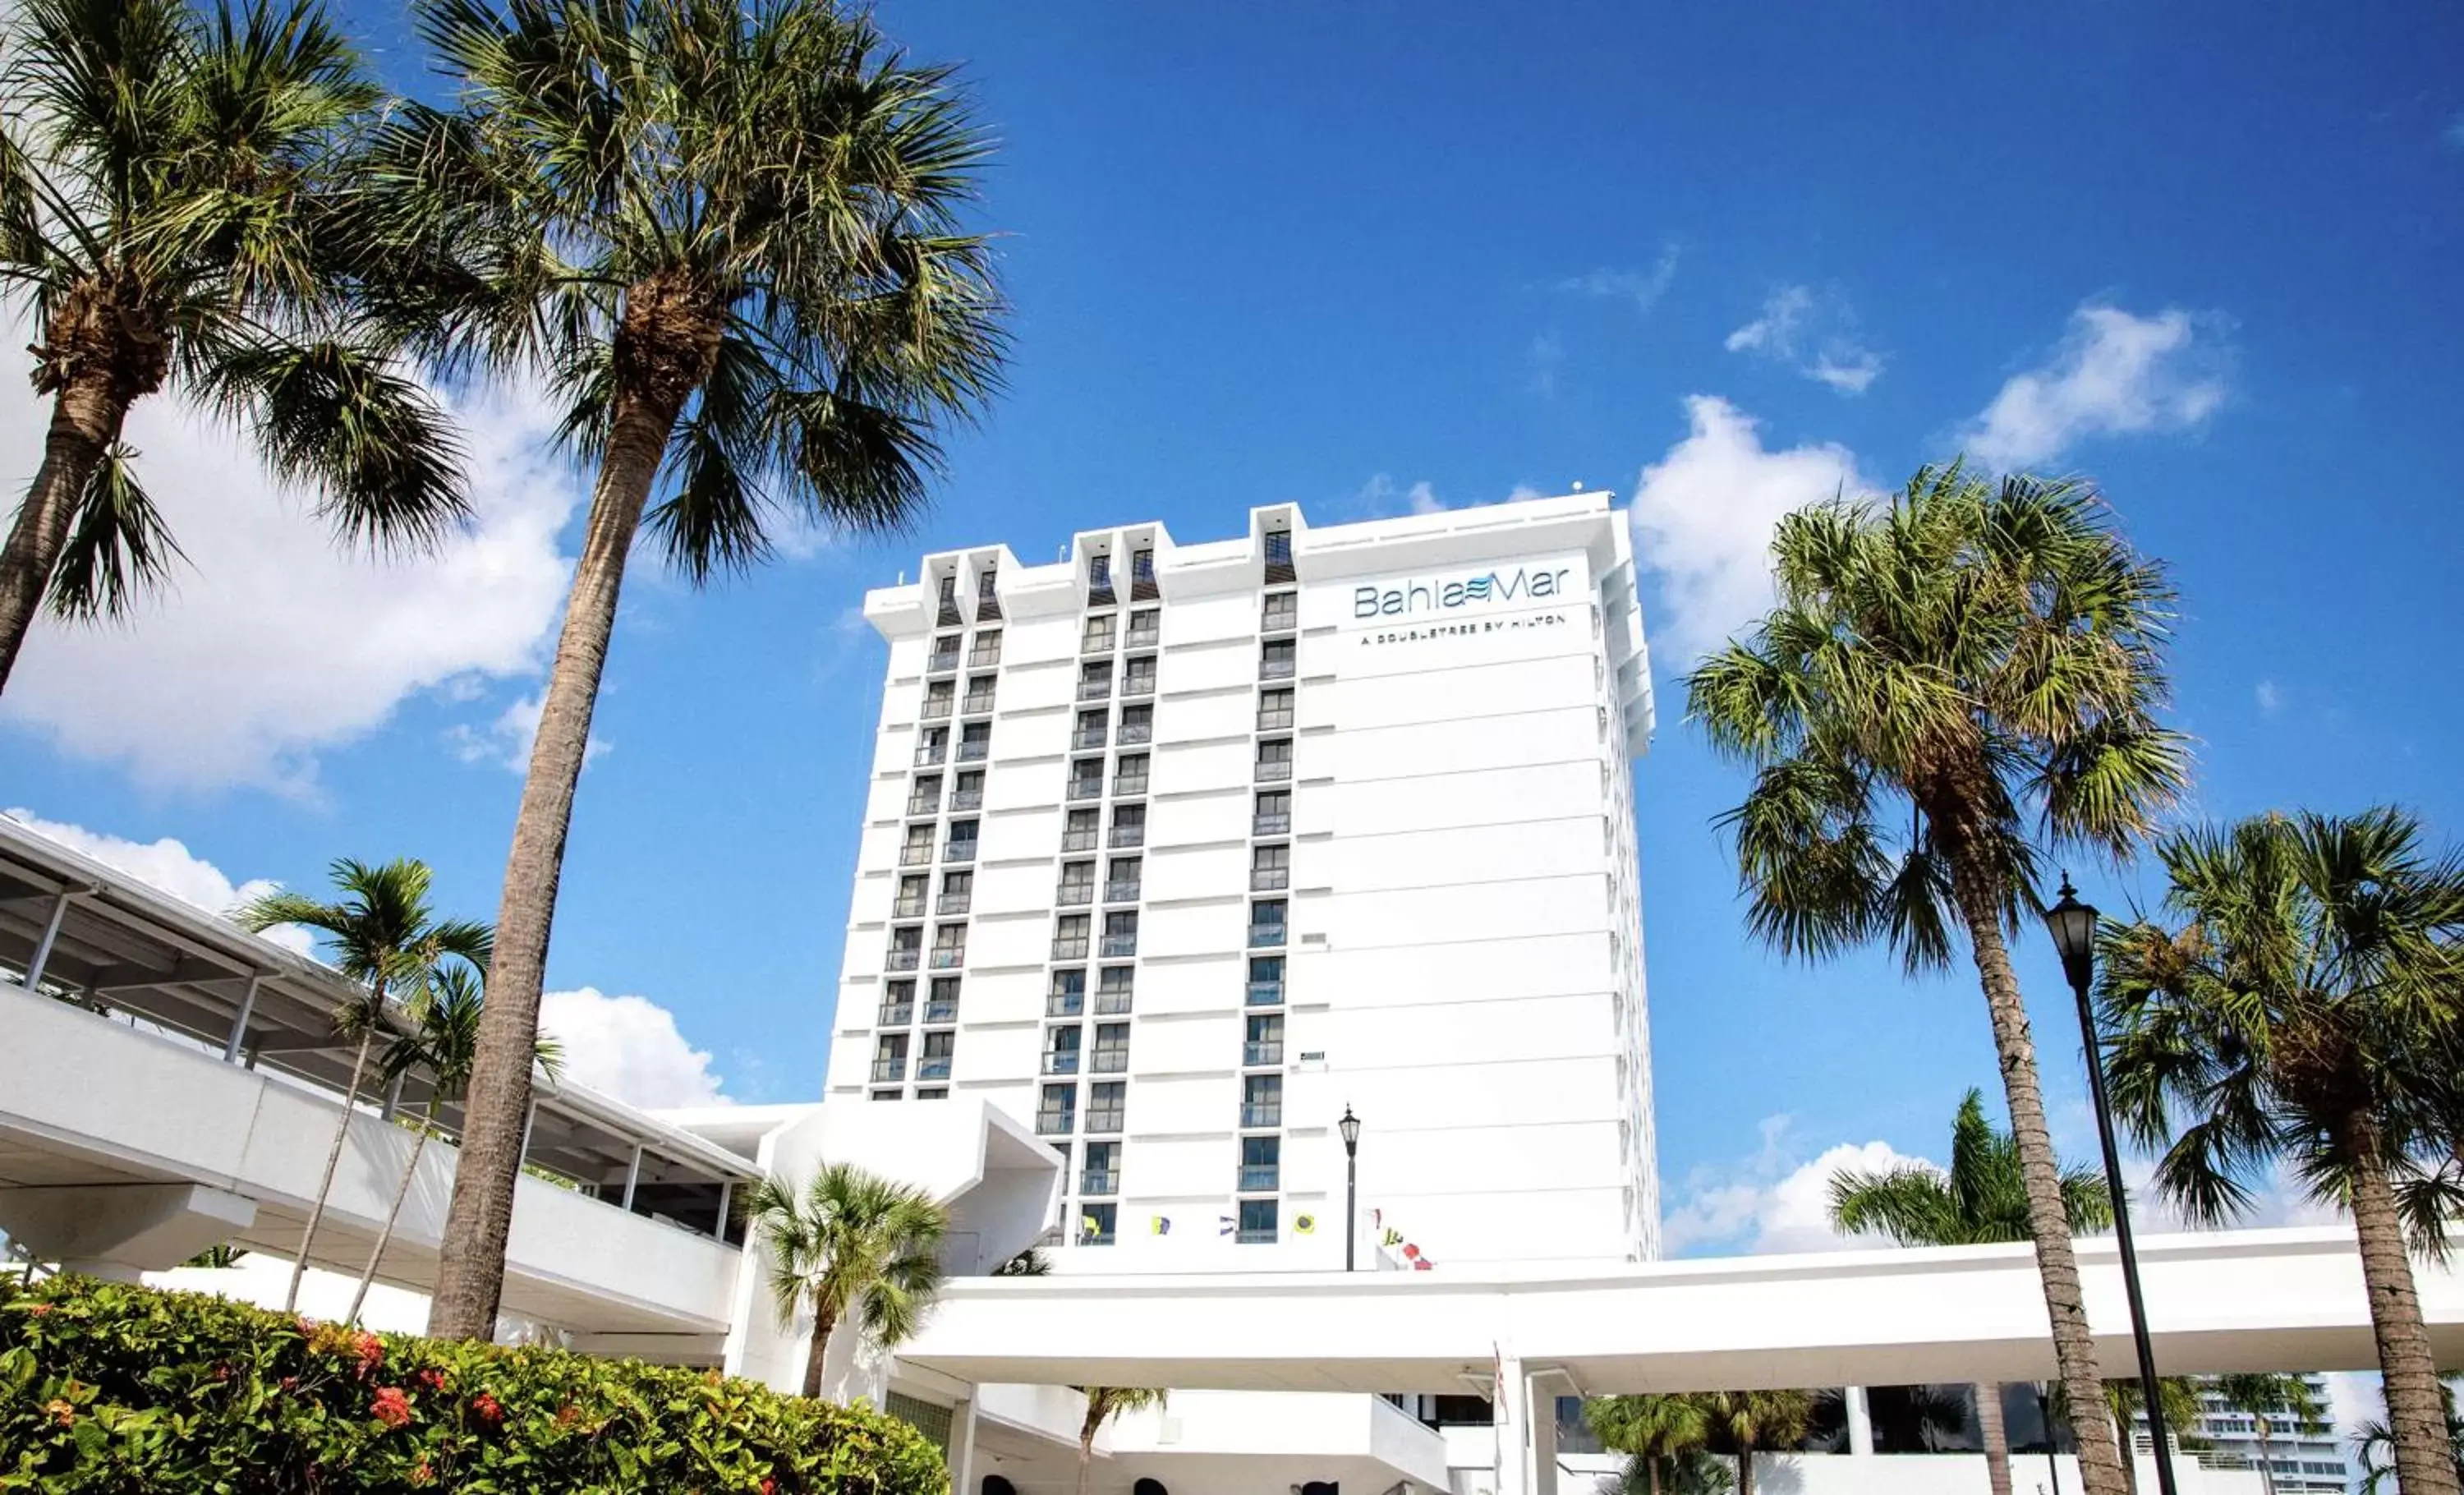 Property Building in Bahia Mar Fort Lauderdale Beach - DoubleTree by Hilton